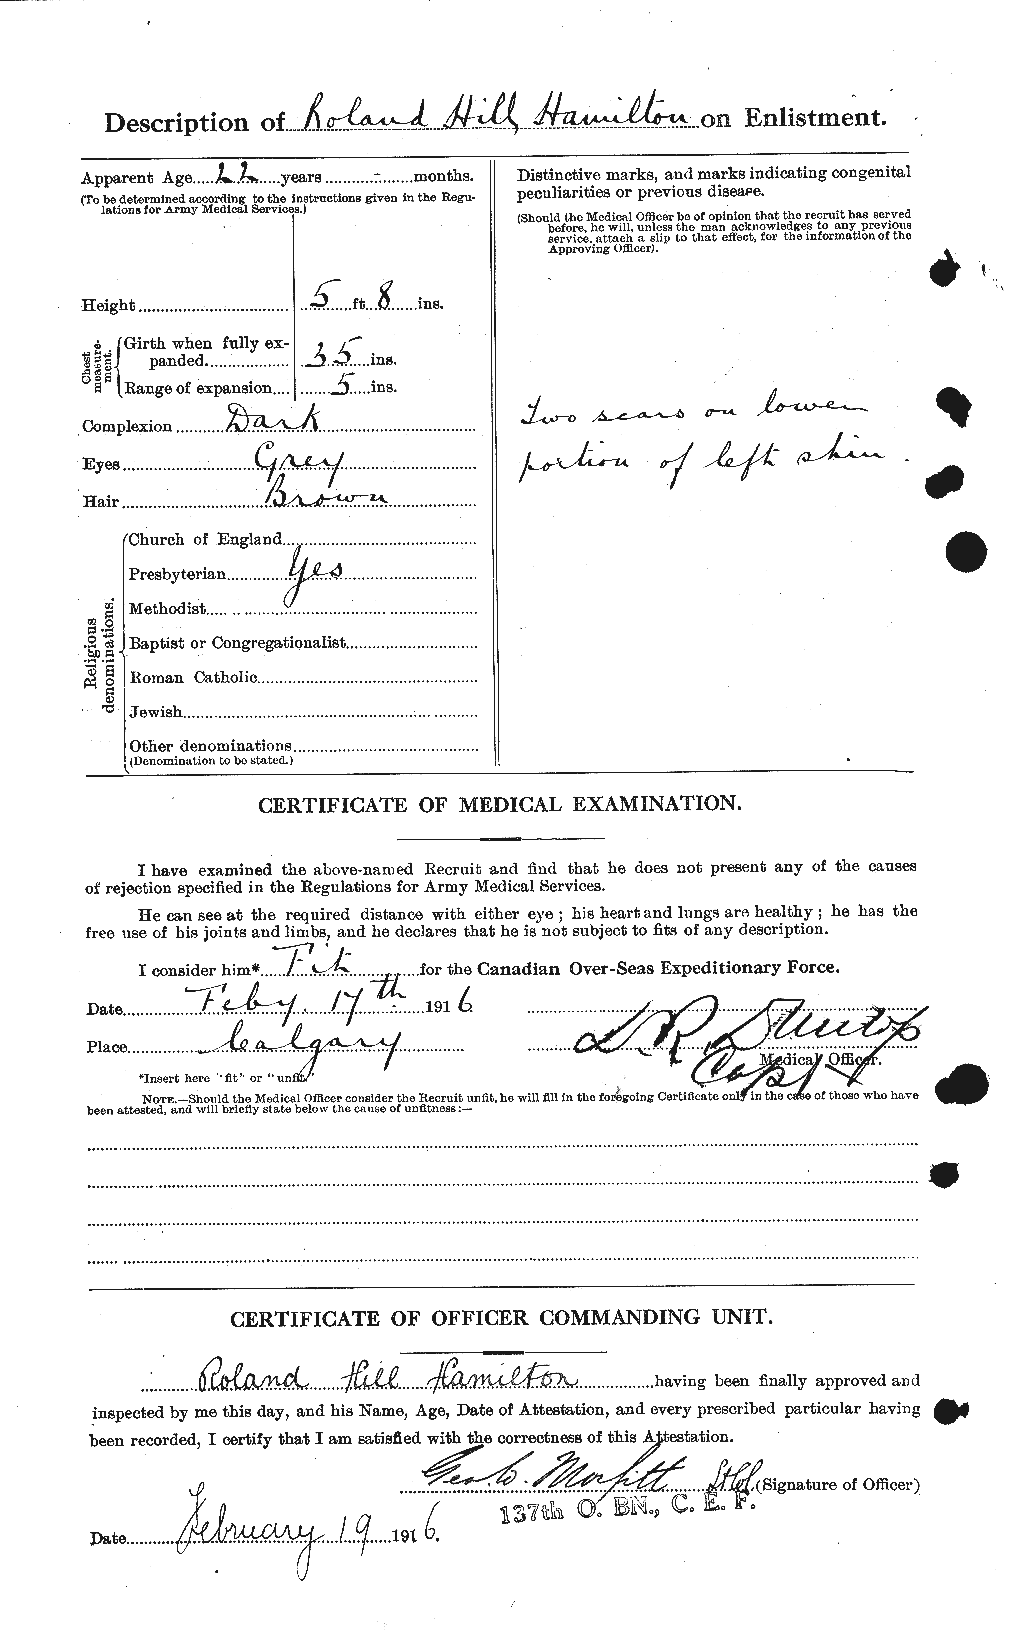 Personnel Records of the First World War - CEF 373282b